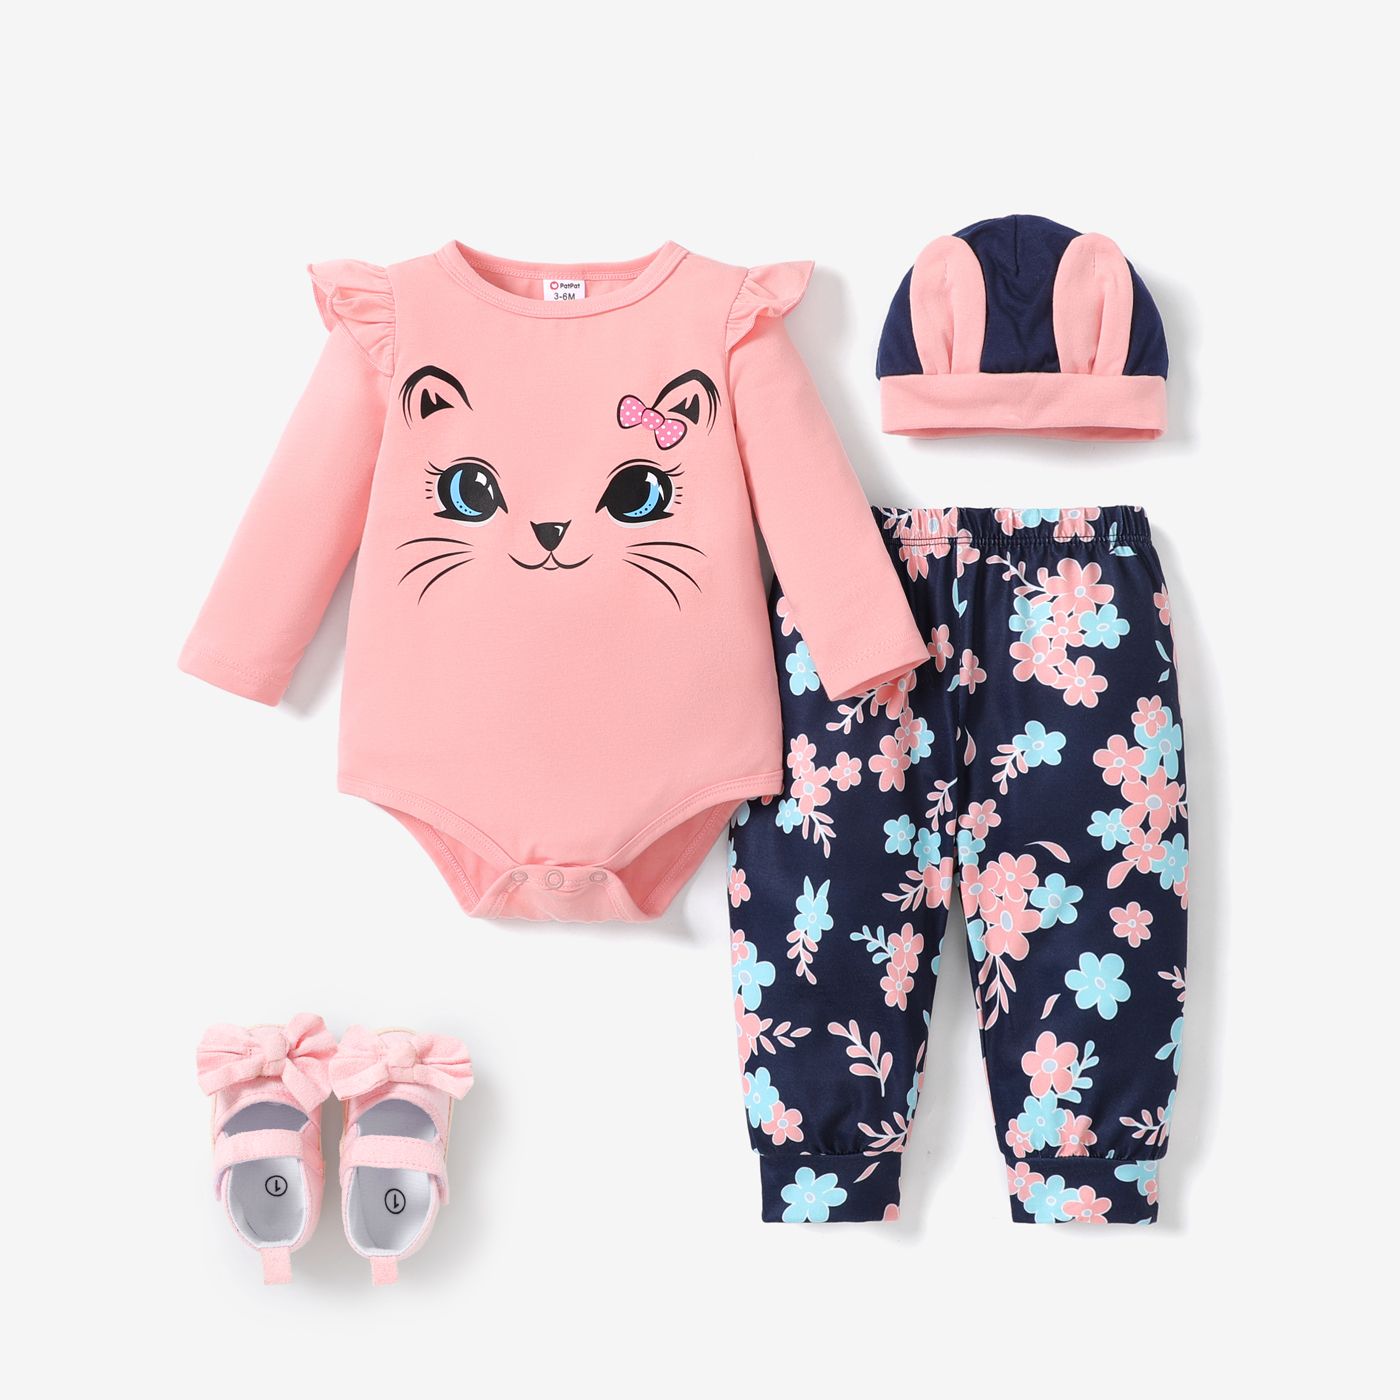 Baby Girl's 3pcs Hyper-Tactile Floral Cat Animal pattern Tshirt and Pants Set with Hat